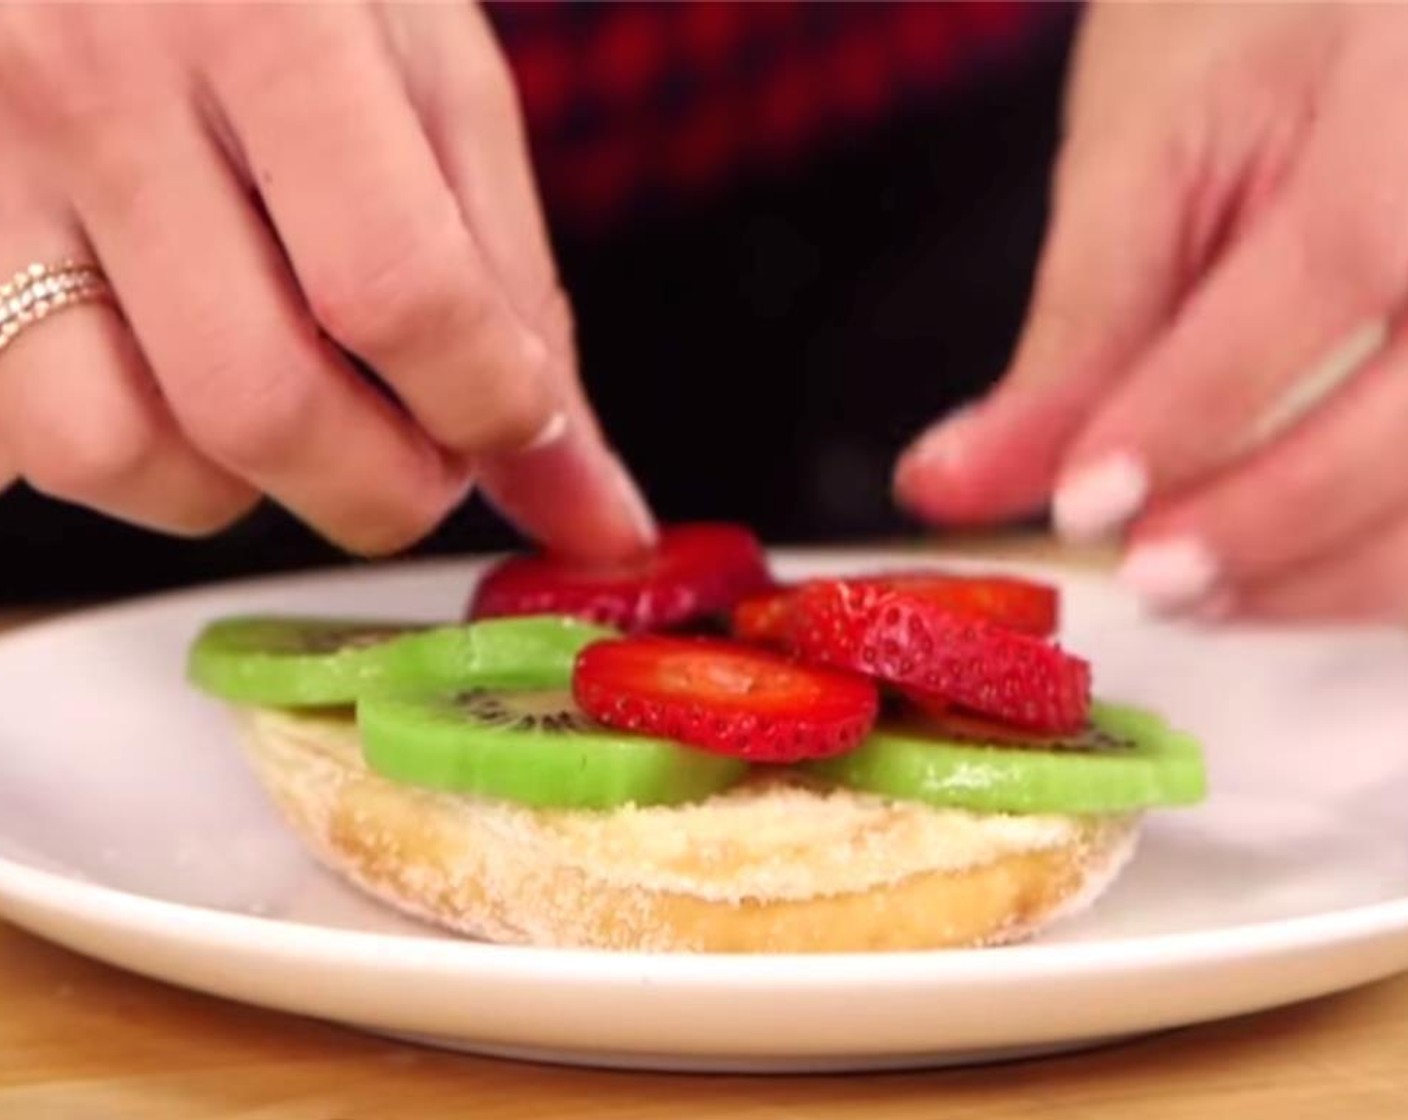 step 3 To assemble the burger, start by slicing the Sugar Donuts (2) in half like a hamburger bun. Add the sliced Kiwifruit (1) and thinly sliced Fresh Strawberries (4) to the bottom half of the "buns."